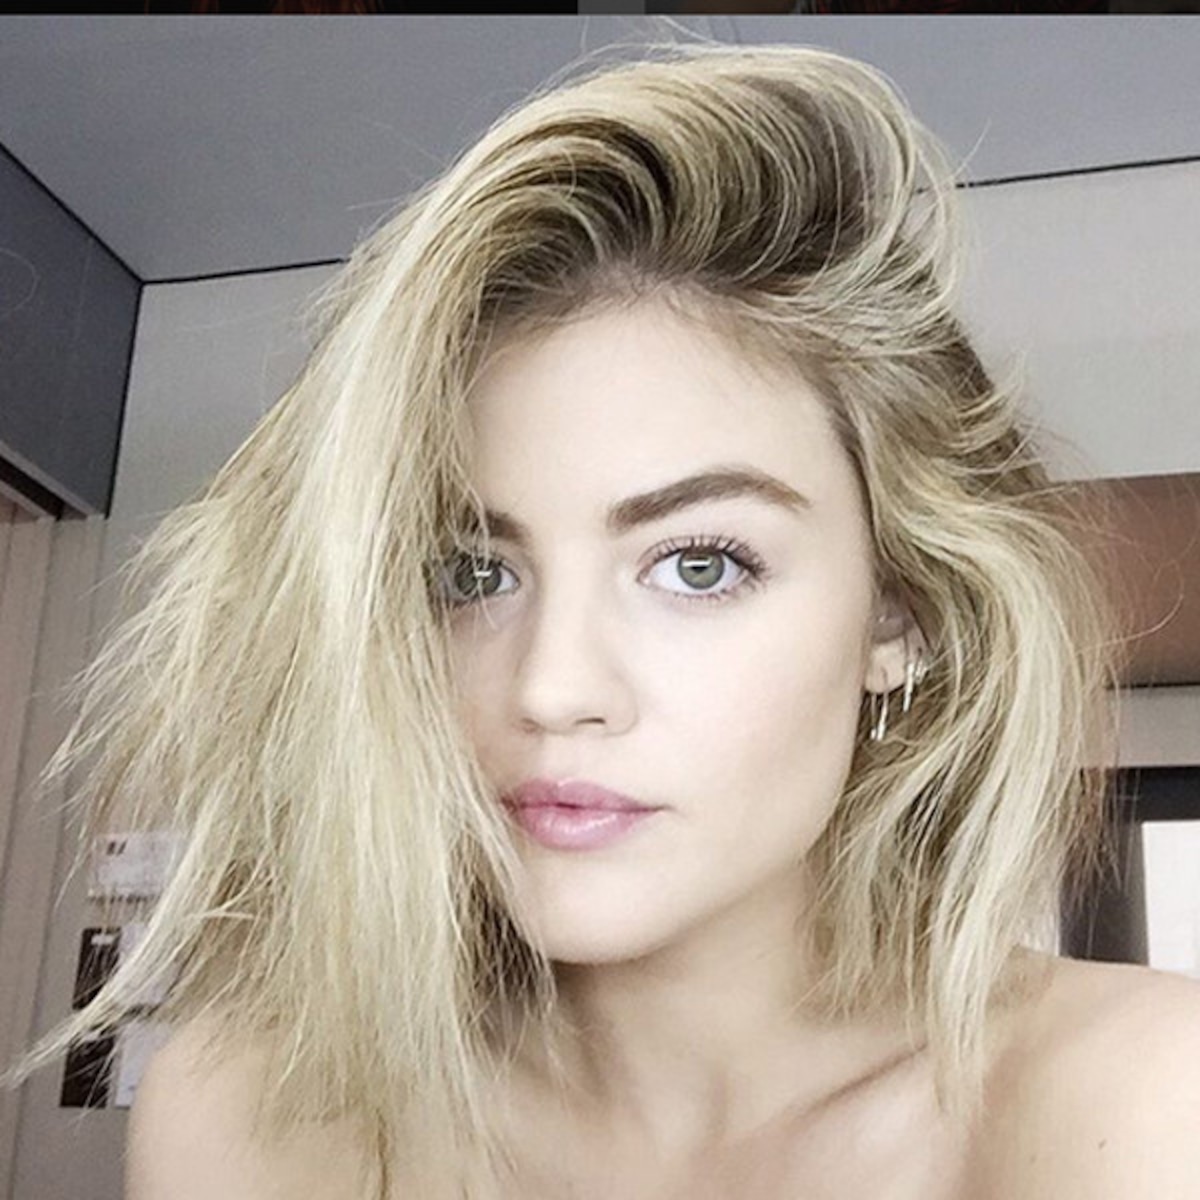 Lucy hale leaked nude photos